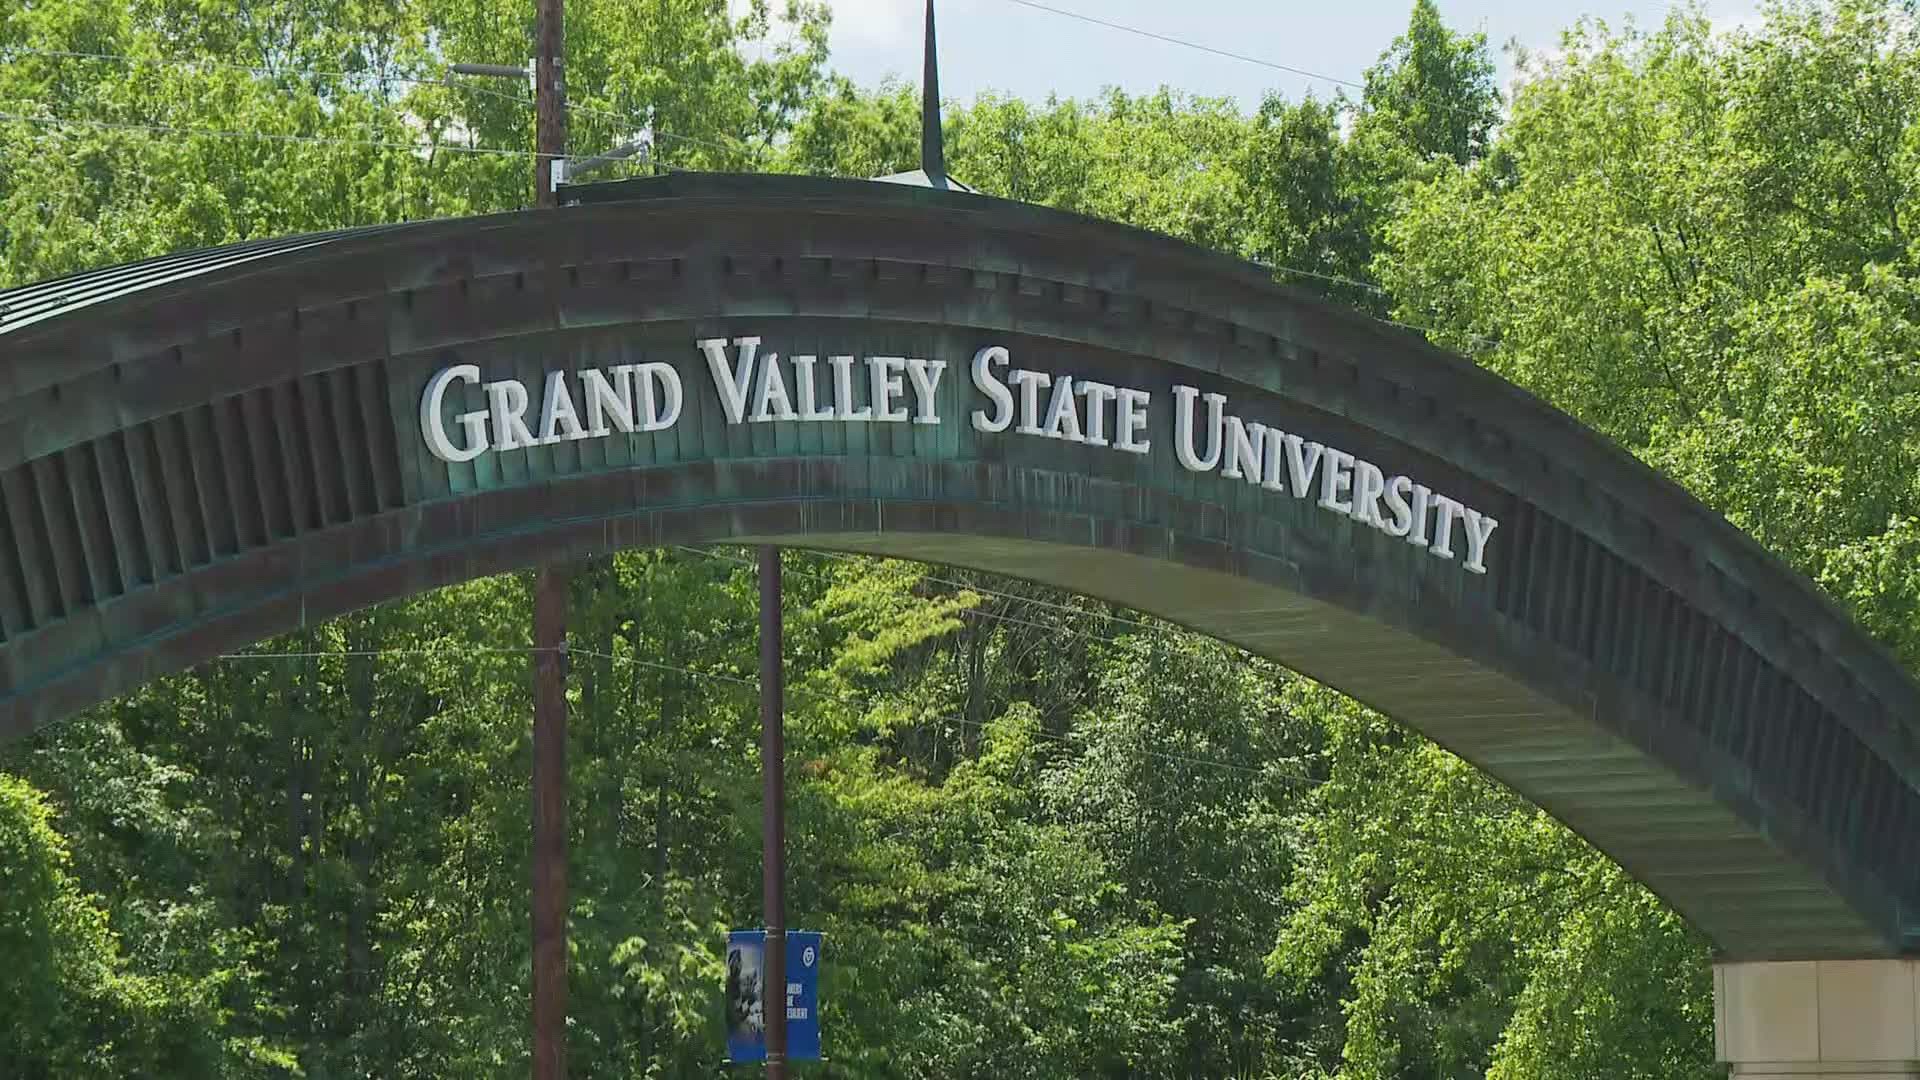 Grand Valley State University is giving students the opportunity to win $100 dollars for being vaccinated against COVID-19.